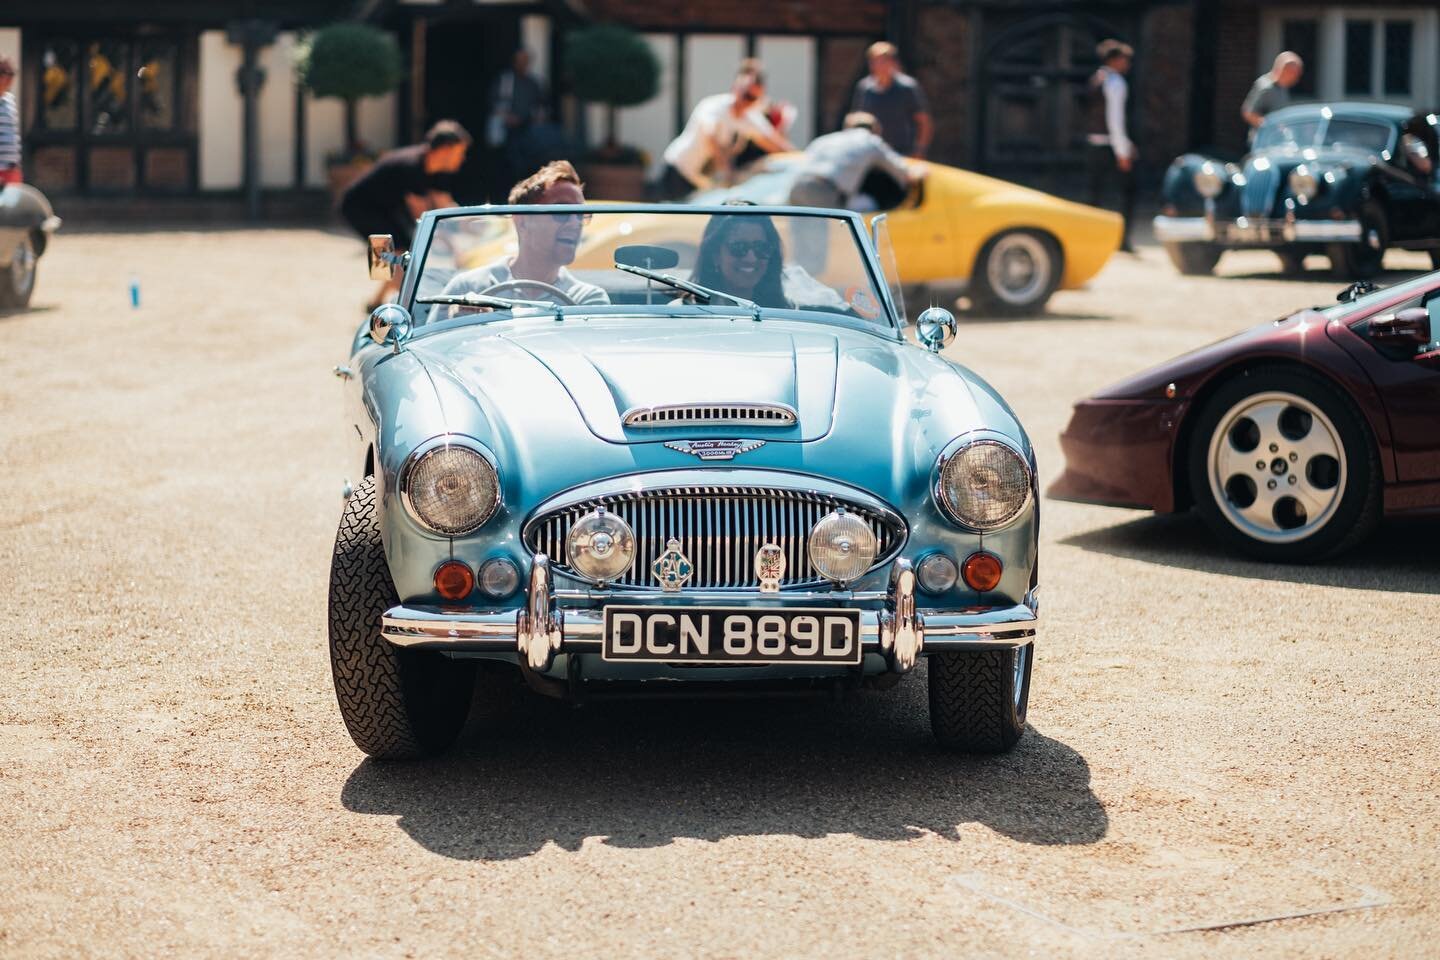 &ldquo;I&rsquo;ve been part of the Hope Classic Rally for the past few years and every year has been wonderful and memorable. From the privilege of driving an amazing car through the British countryside, to the evening dinner and entertainment, to ra